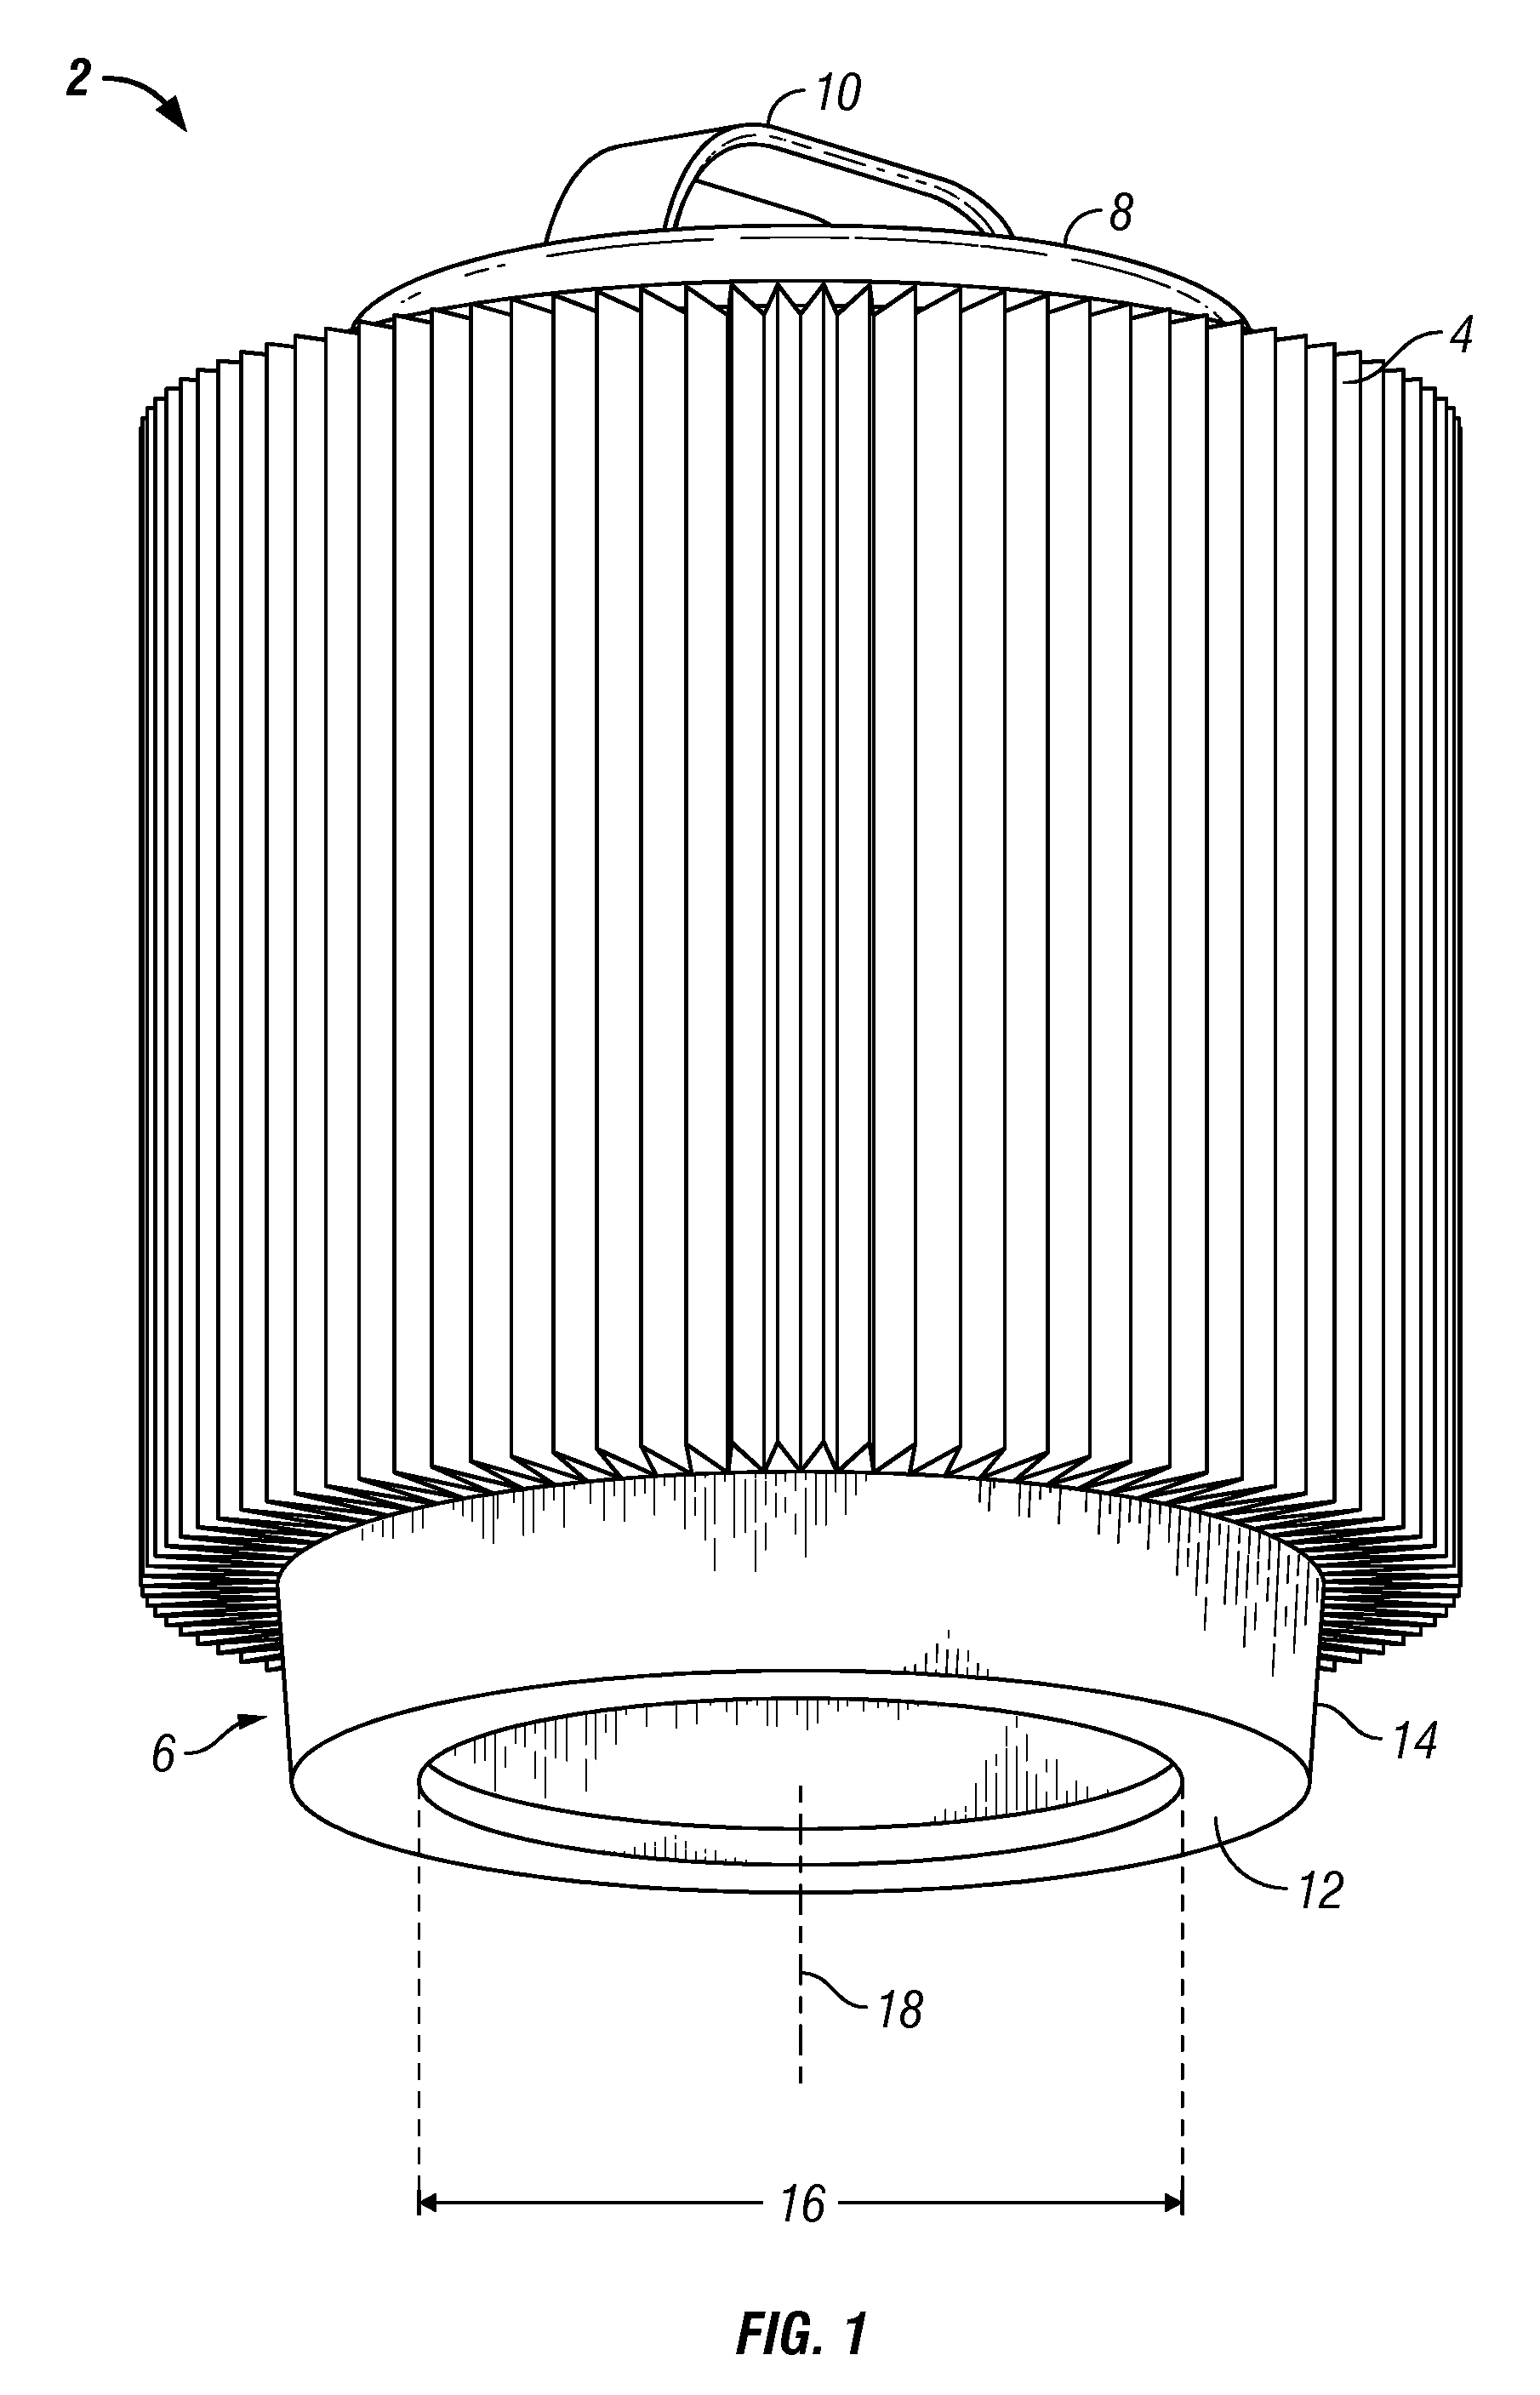 Filter and system for improved sealing and ease of attachment on a vacuum cleaner